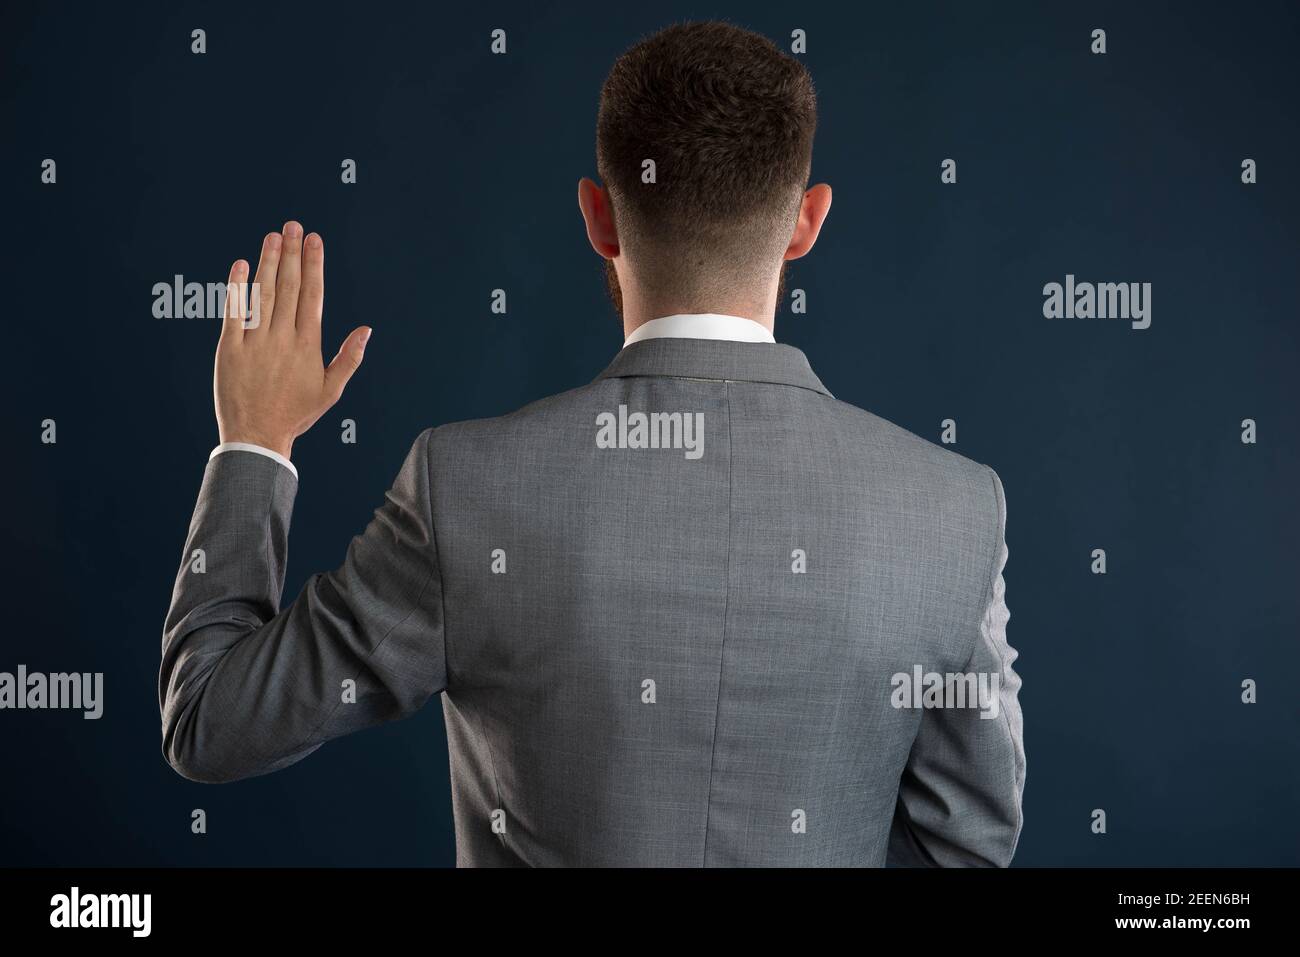 Young businessman taking an oath with his back to the camera wearing a grey jacket Stock Photo